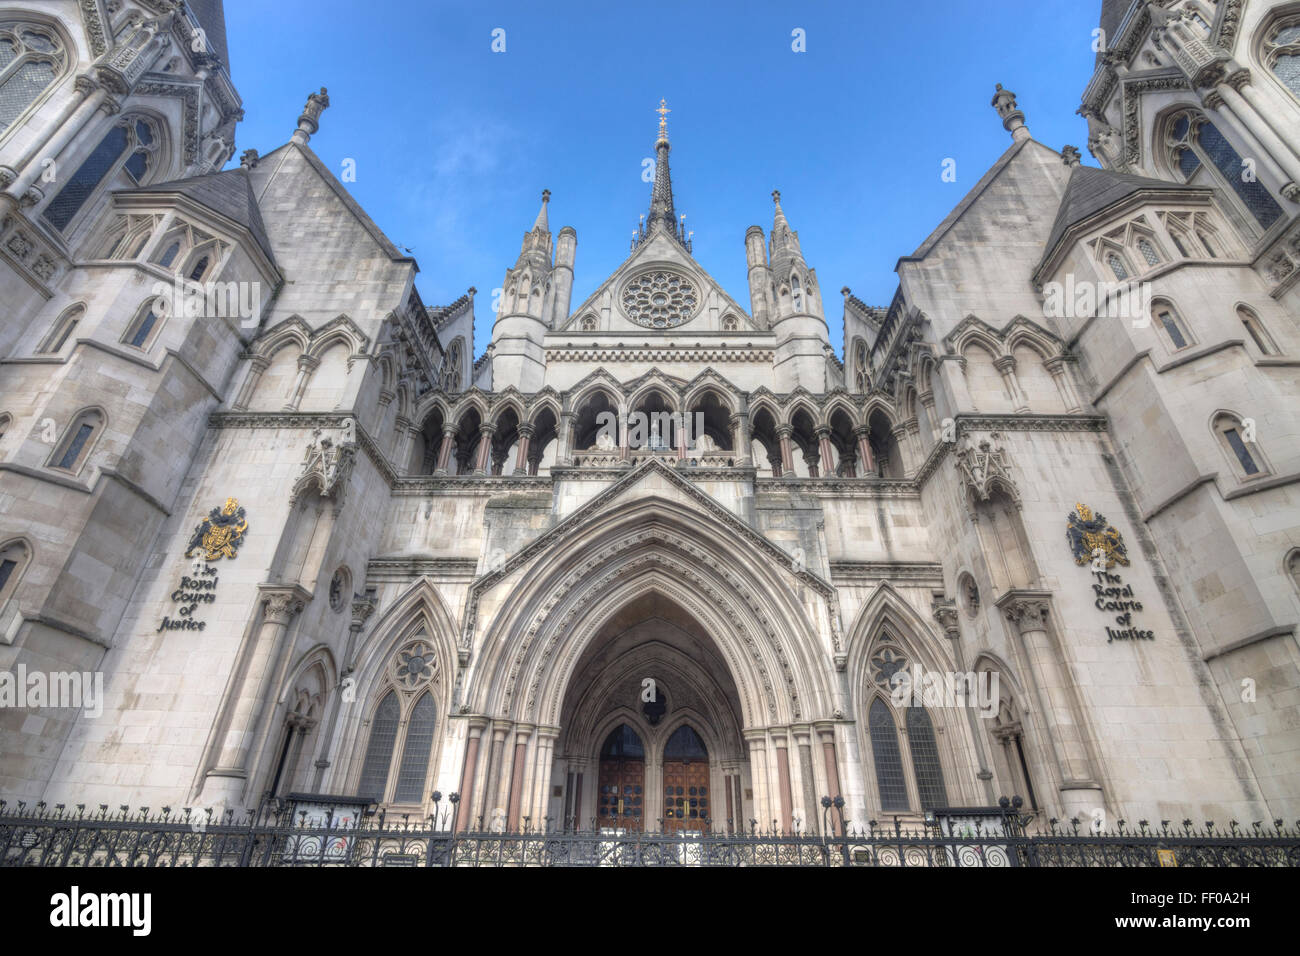 Royal Courts of Justice High Court London Stockfoto